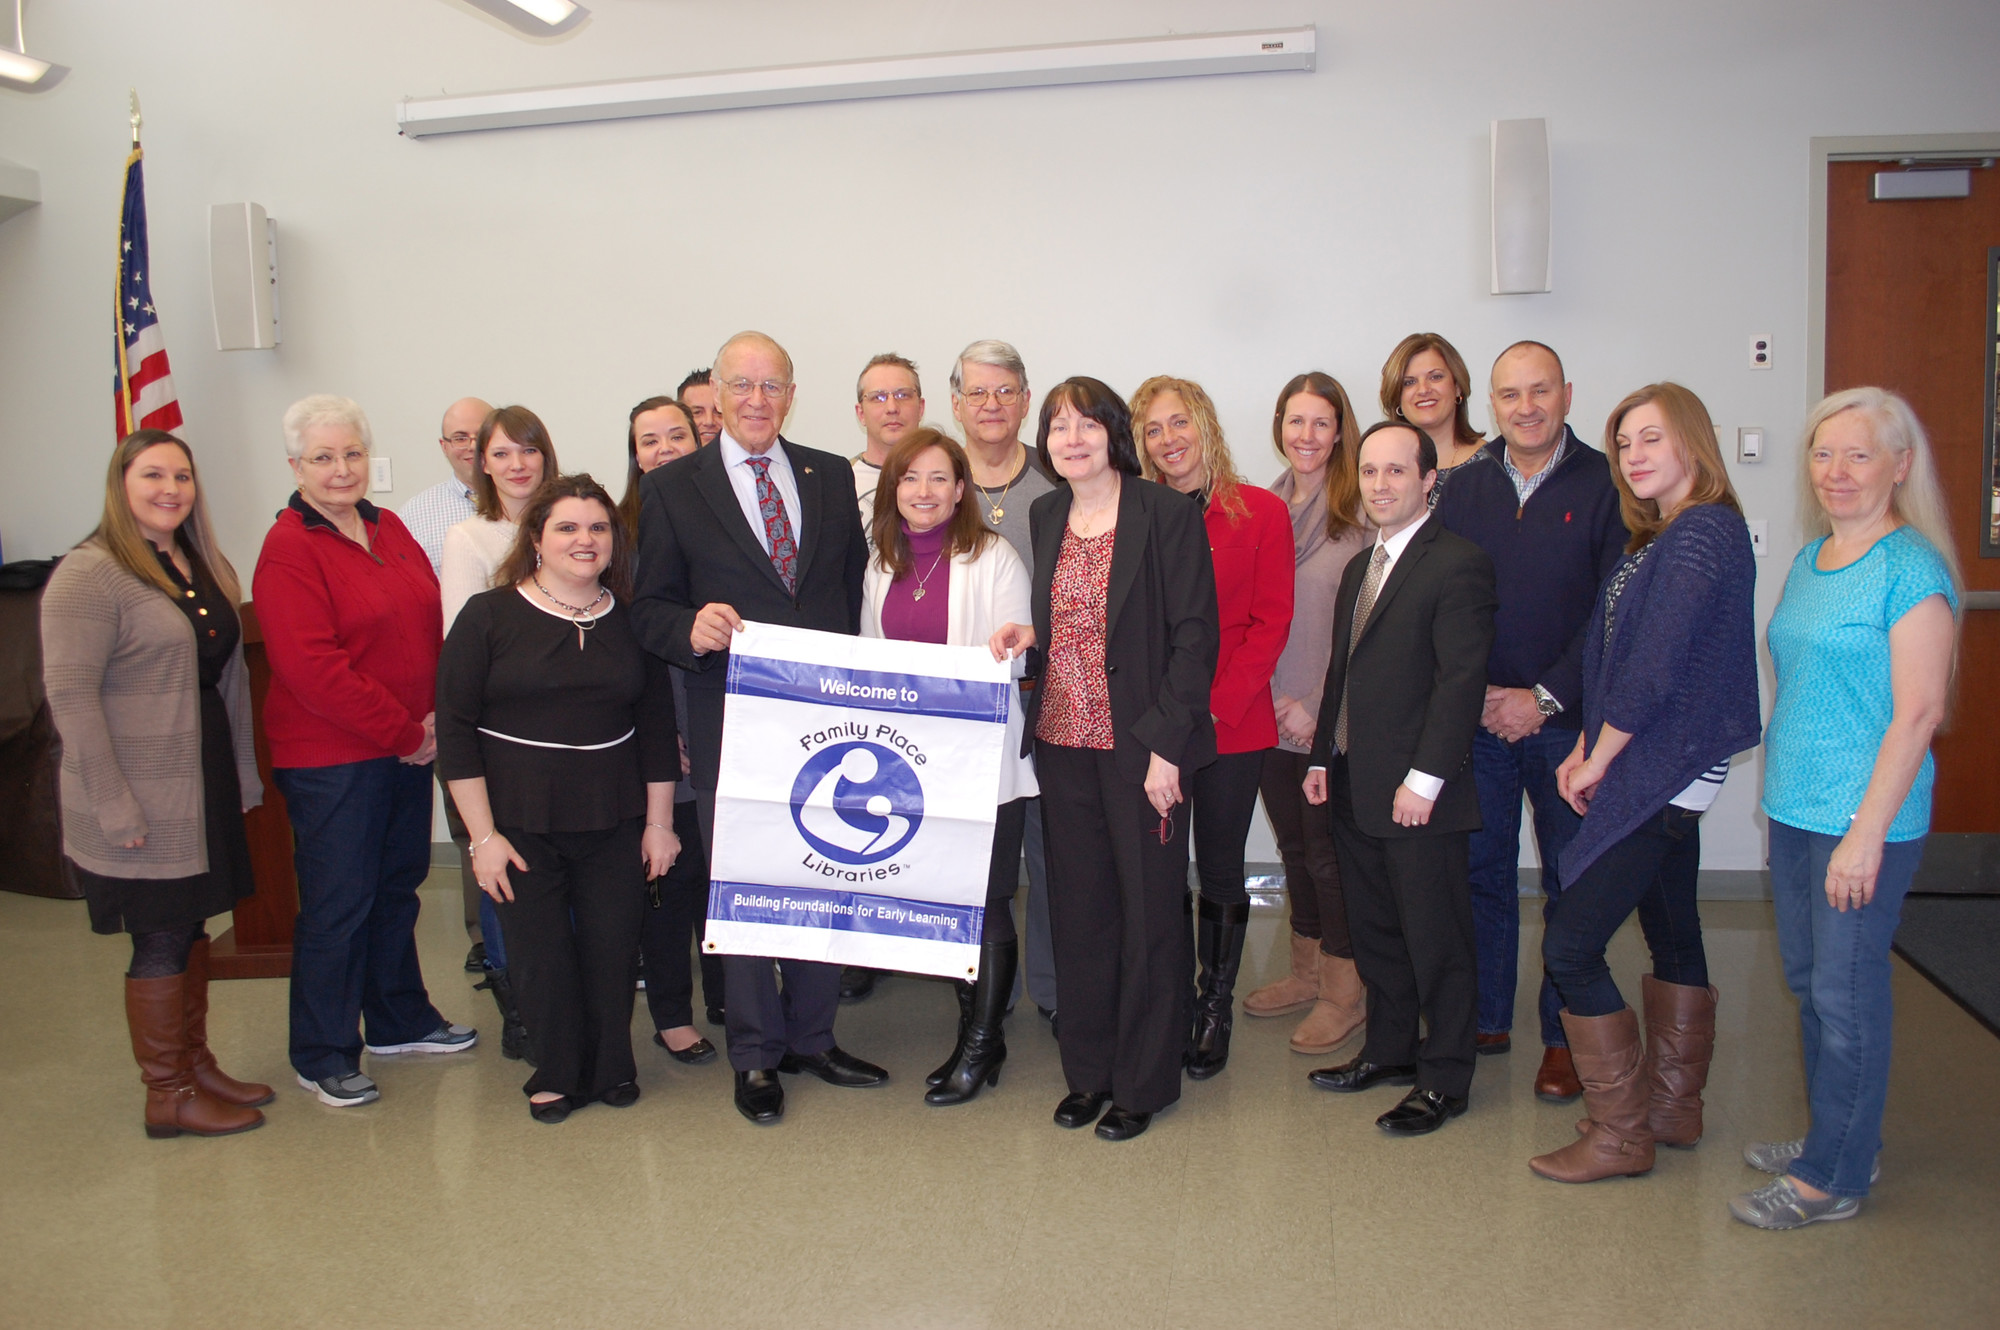 Family Place Libraries representatives presented the Wantagh Public Library with a banner proclaiming the designation.